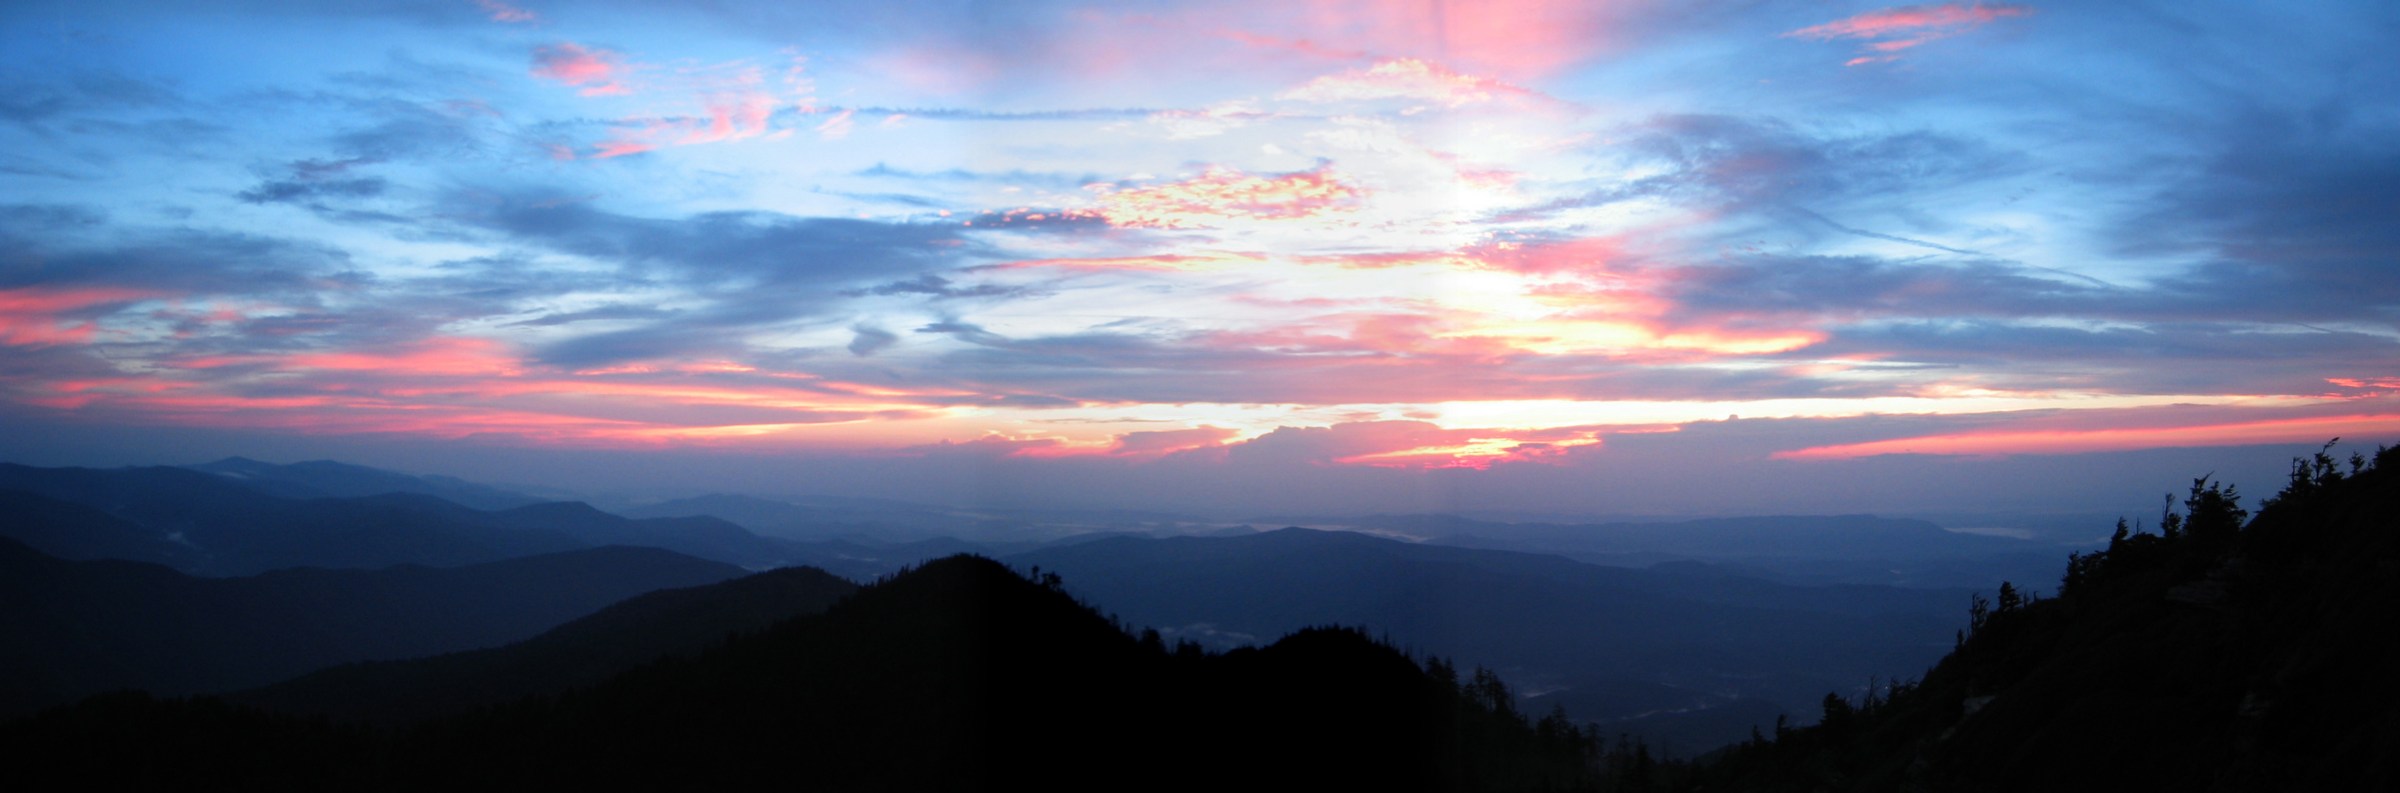 Sunset on Mount LeConte